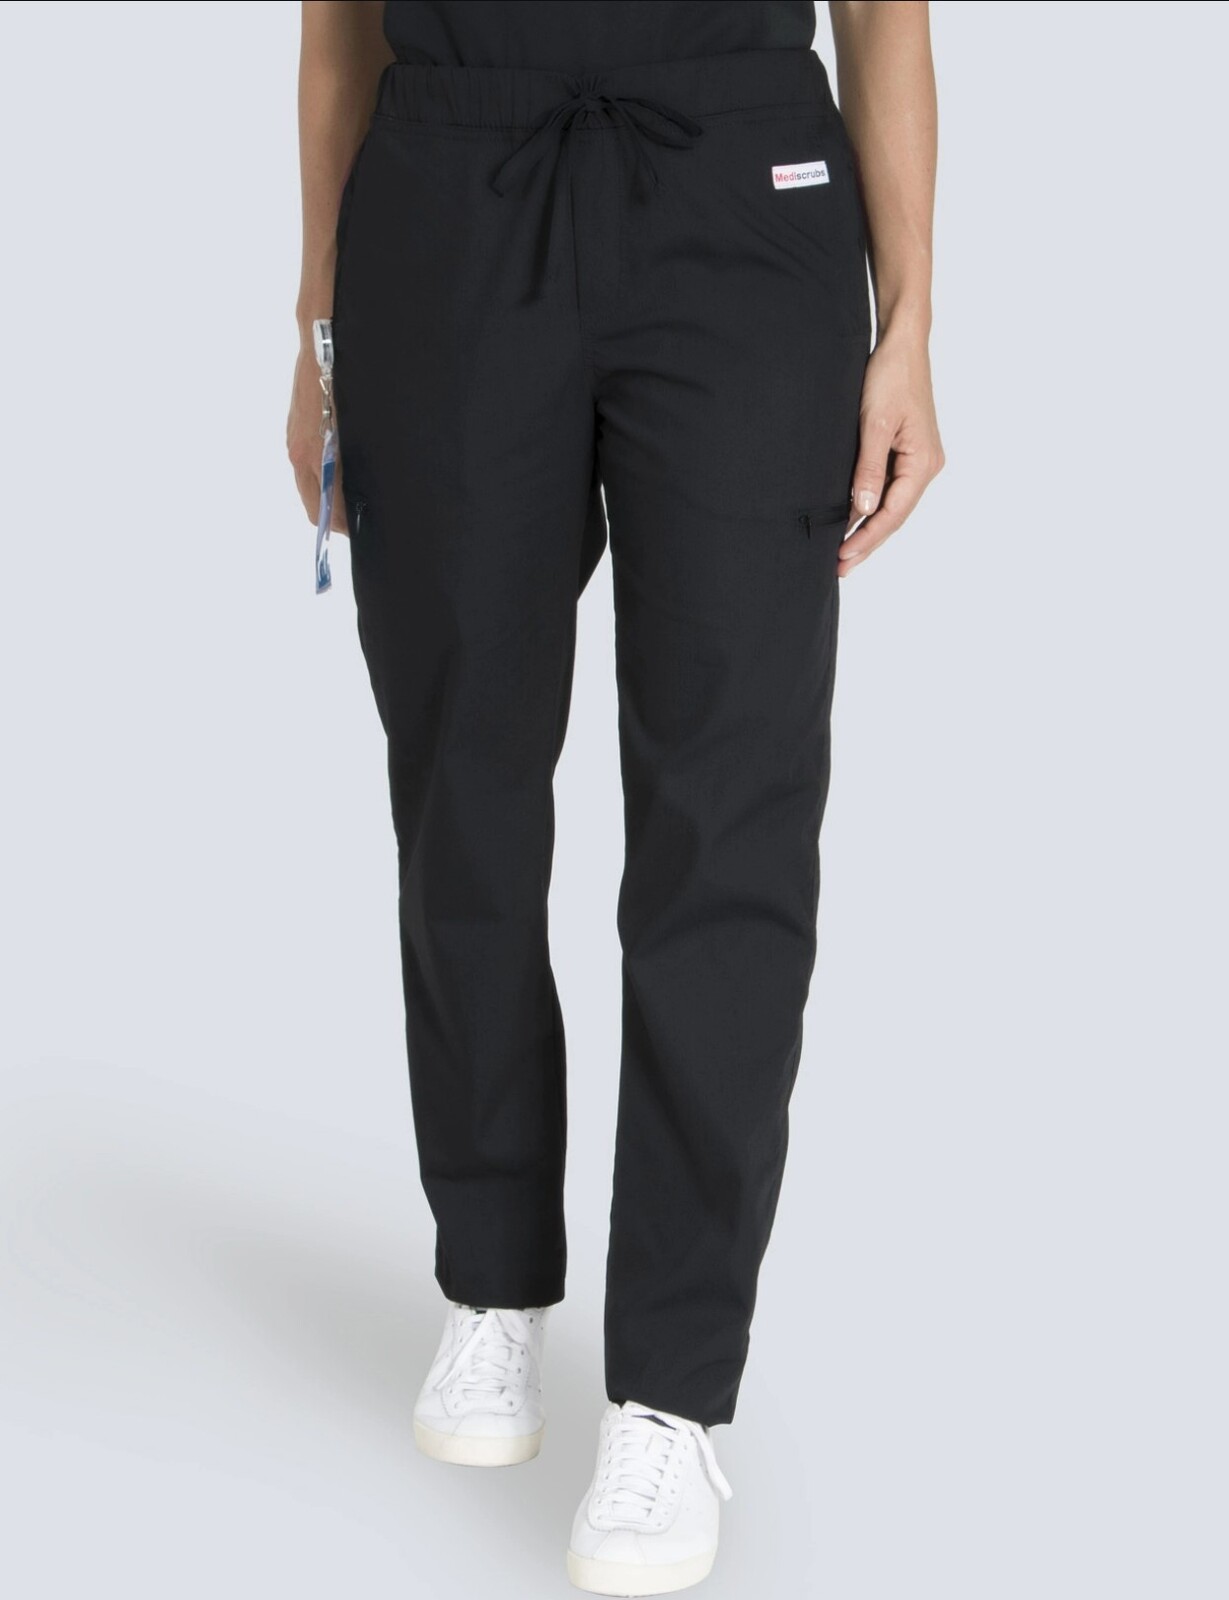 RBWH Nuclear Medicine Department Pant Only Bundle (Utility Pants in Black)